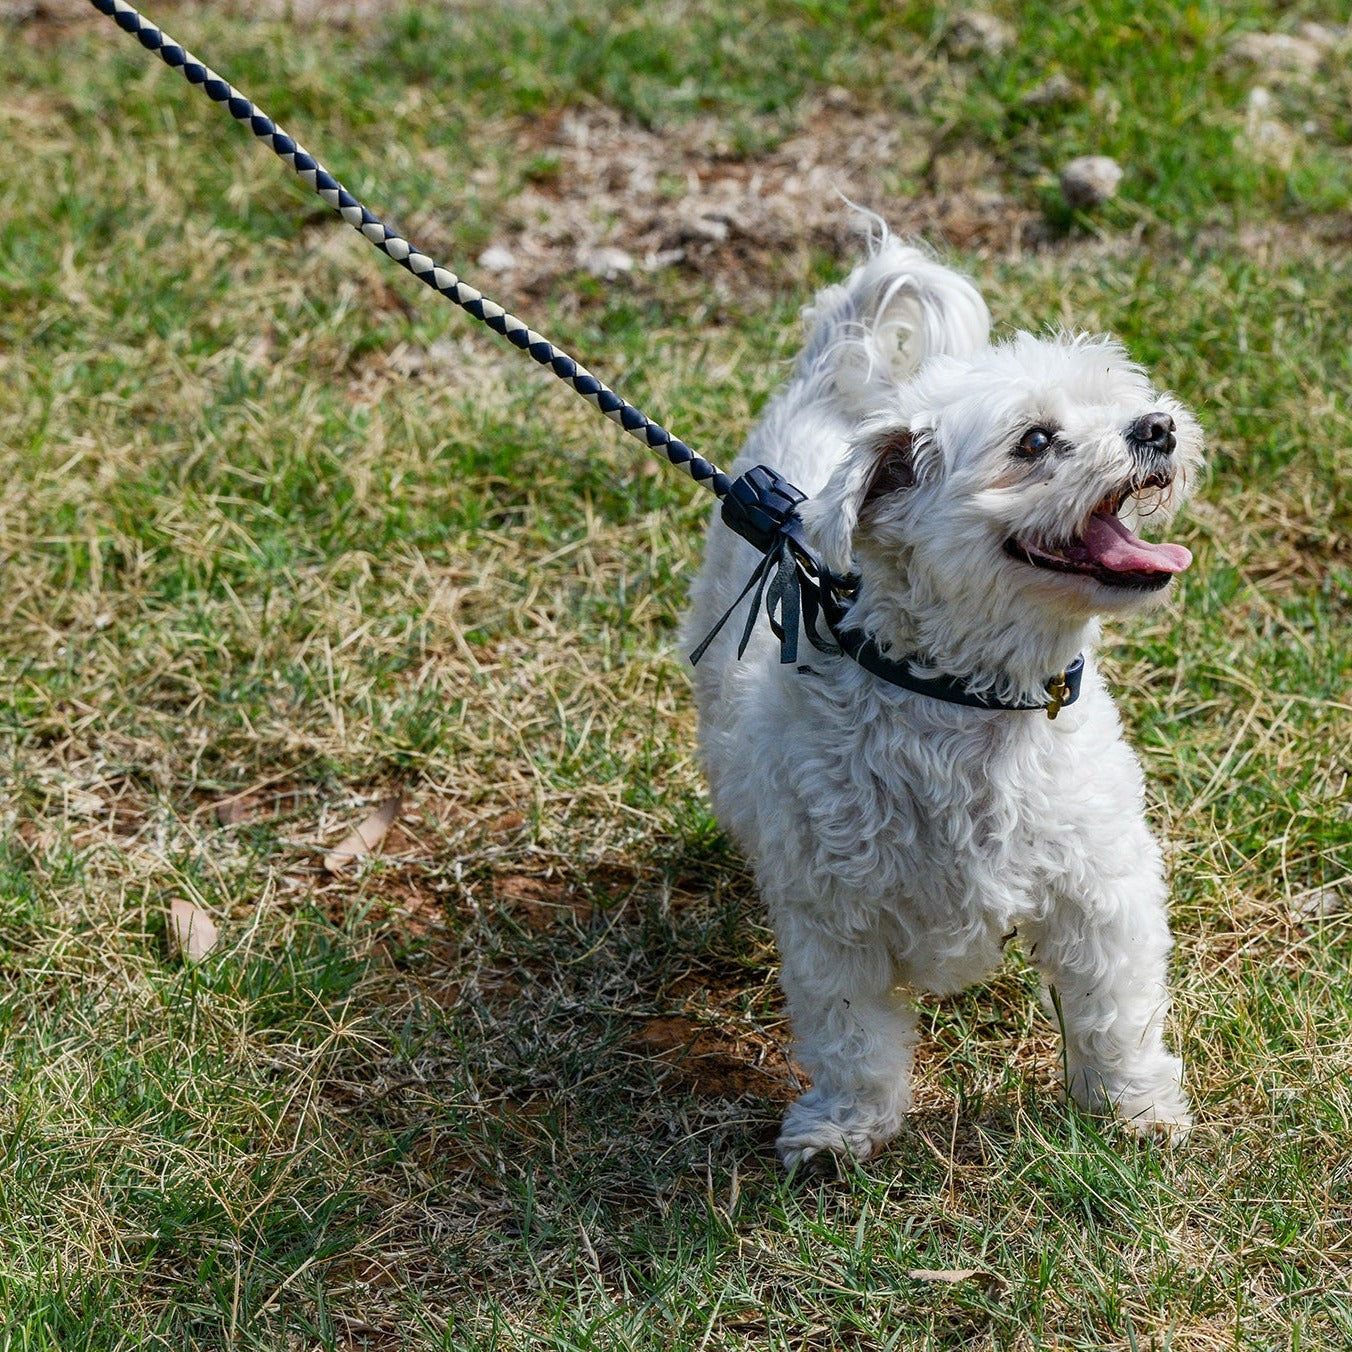 A joyful white maltese dog on a leash made with Georgie Paws' Swanky Lead - Navy hardware and buffalo leather prances through a grassy area, tongue out, displaying a playful and happy demeanor on a sunny day.